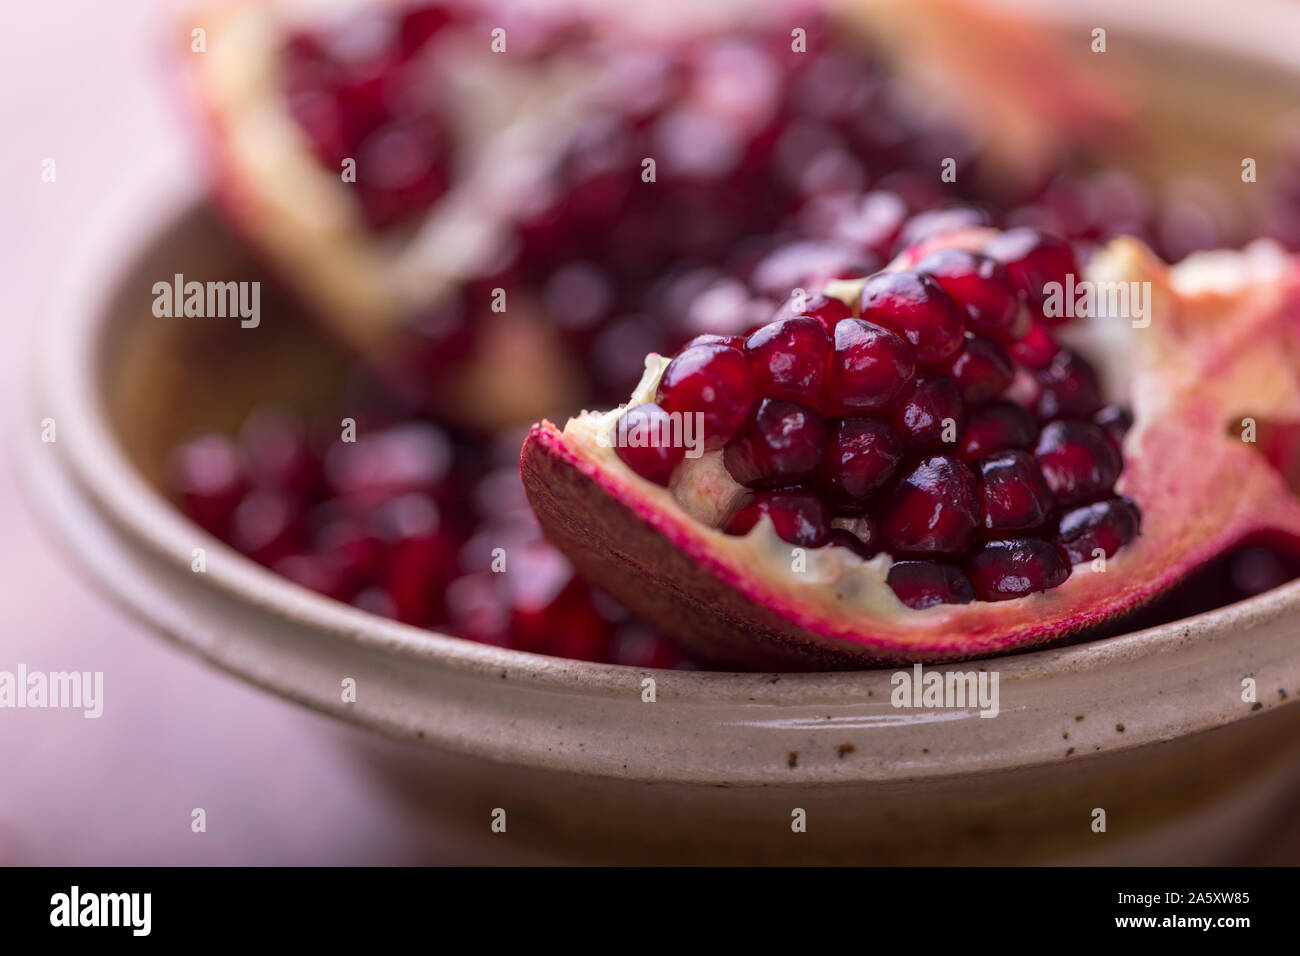 Closeup of pomegranate slices and seeds in a ceramic bowl. Stock Photo